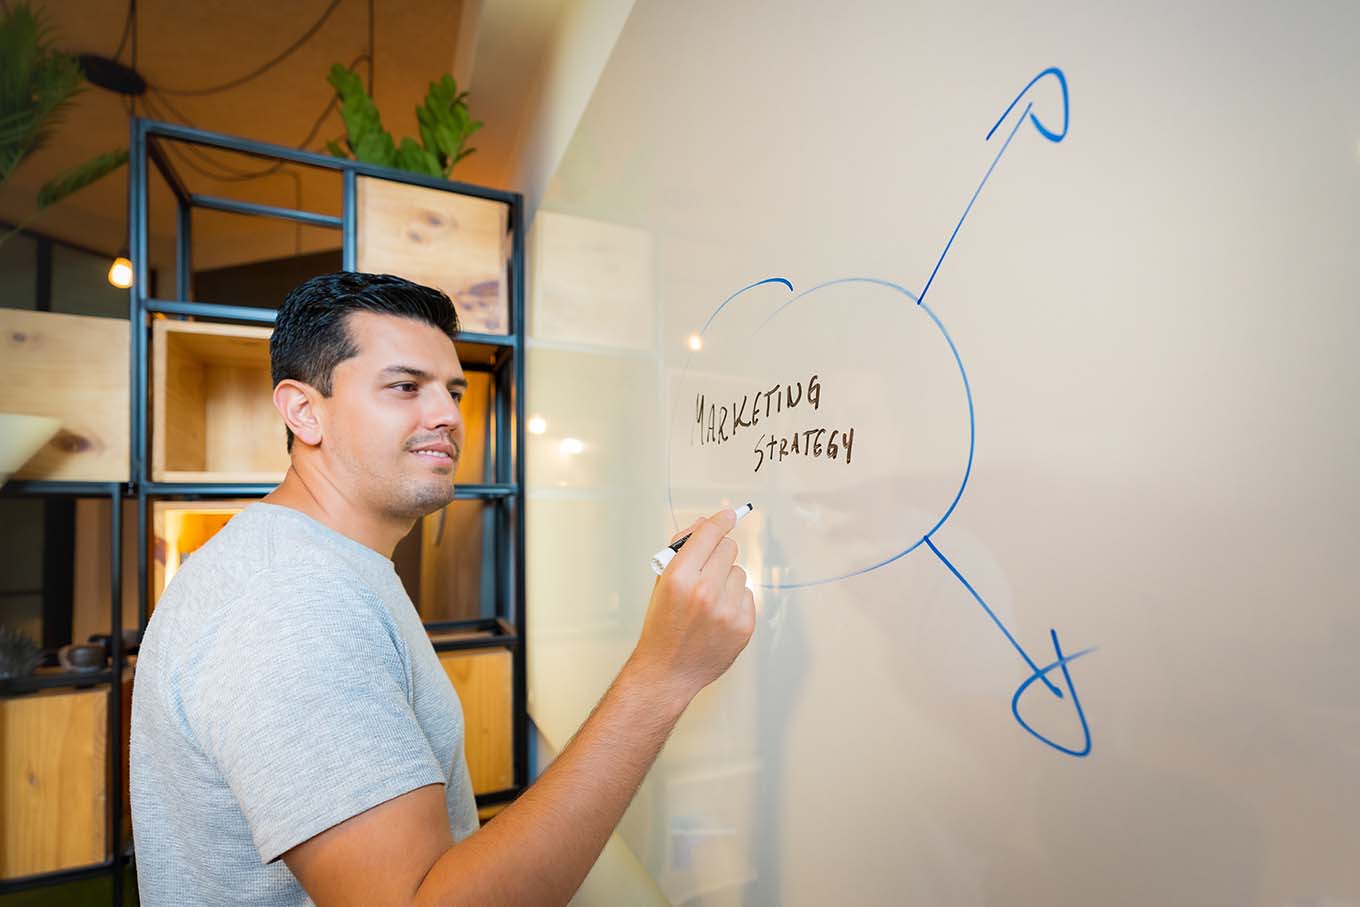 Creating a digital marketing strategy on the whiteboard